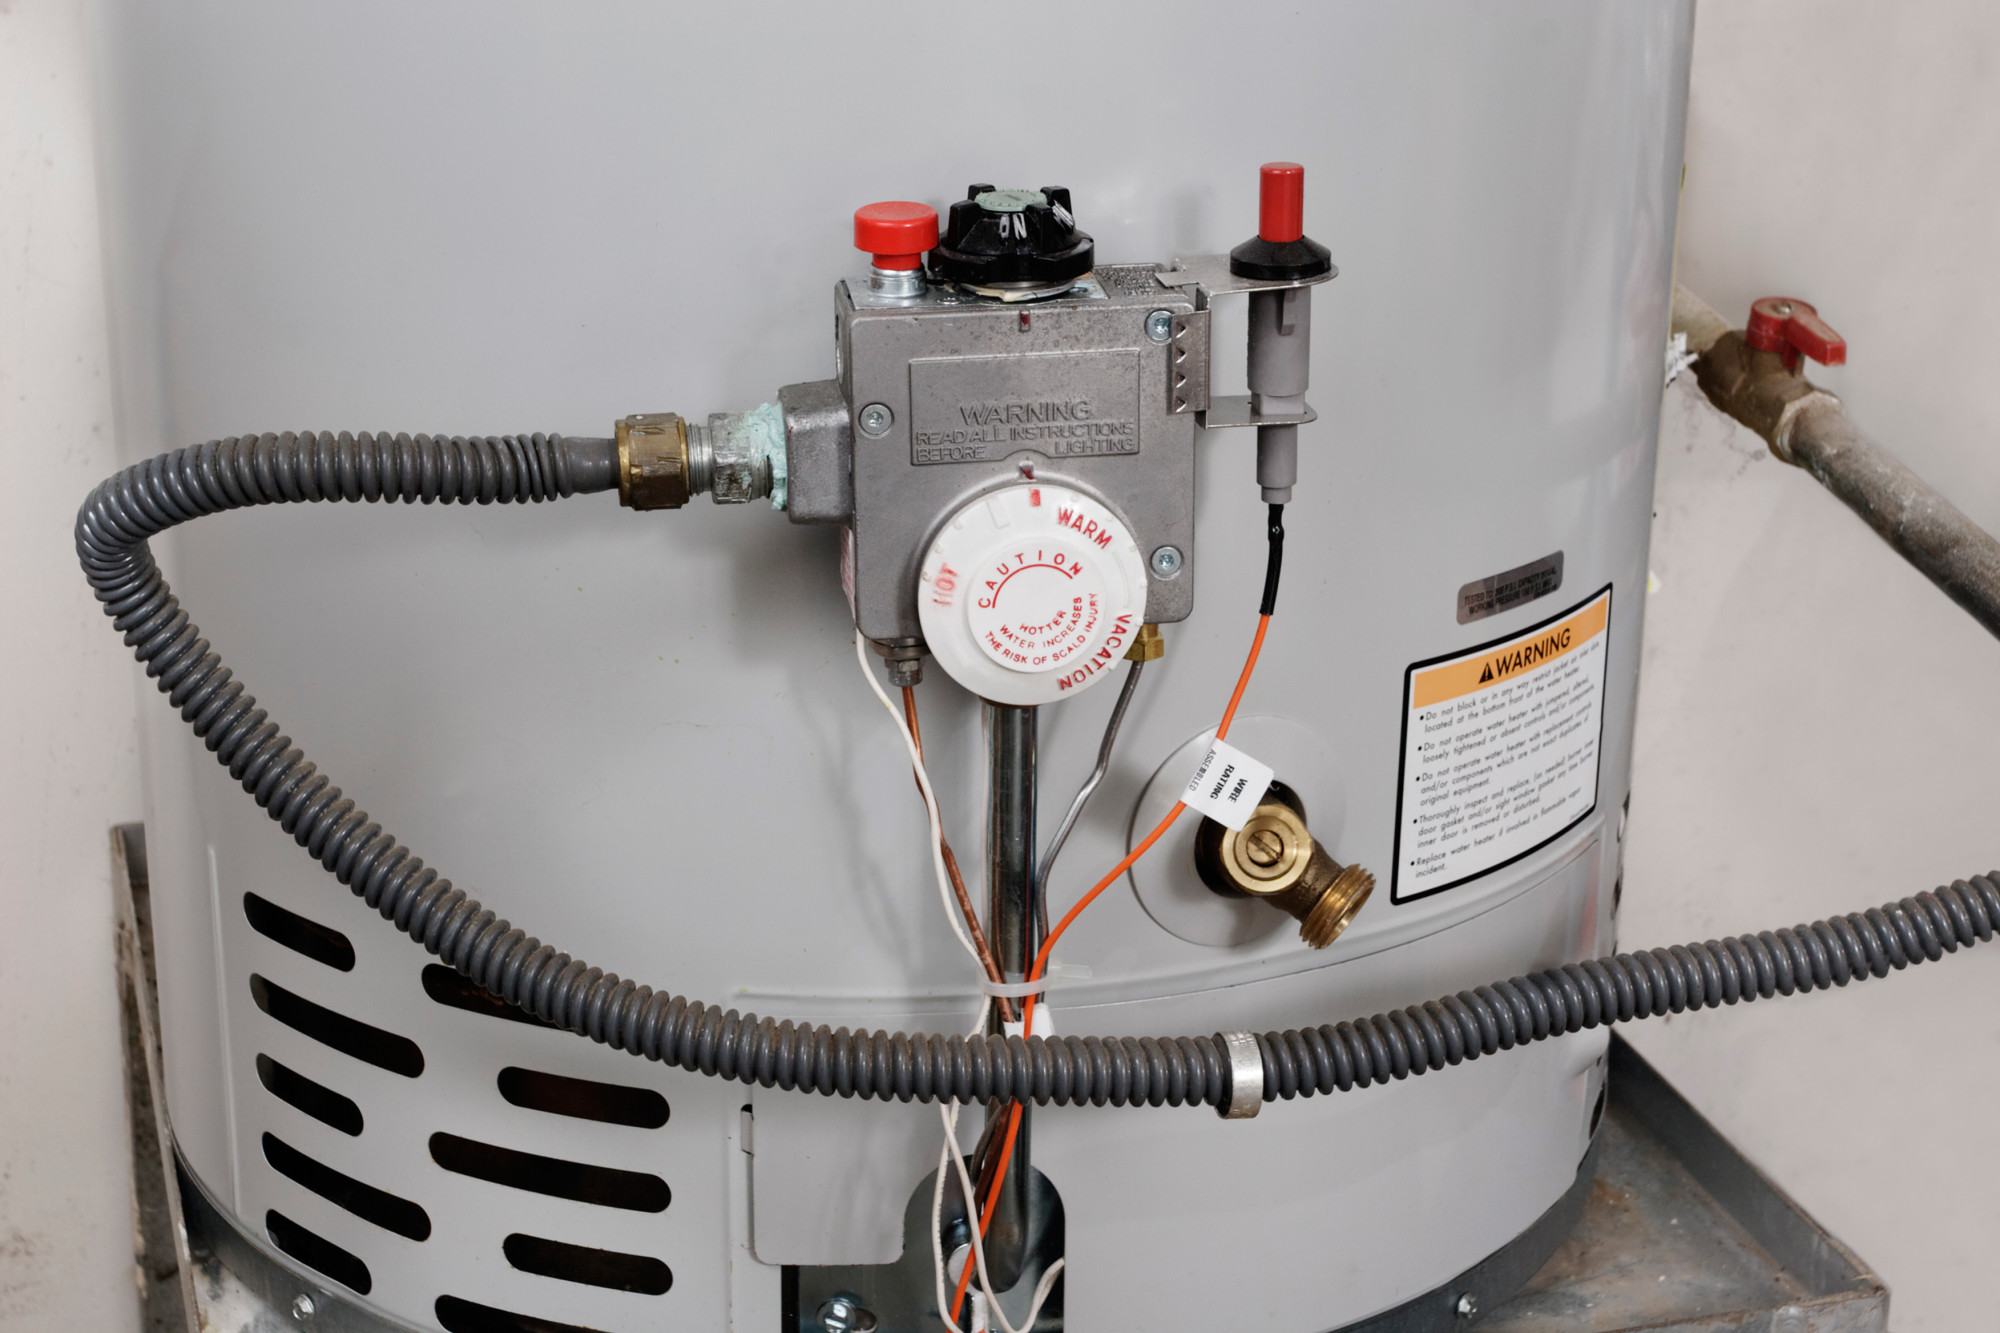 Do you need a new water heater? Learn all about the different types of water heaters and how to choose the best water heater for your needs.